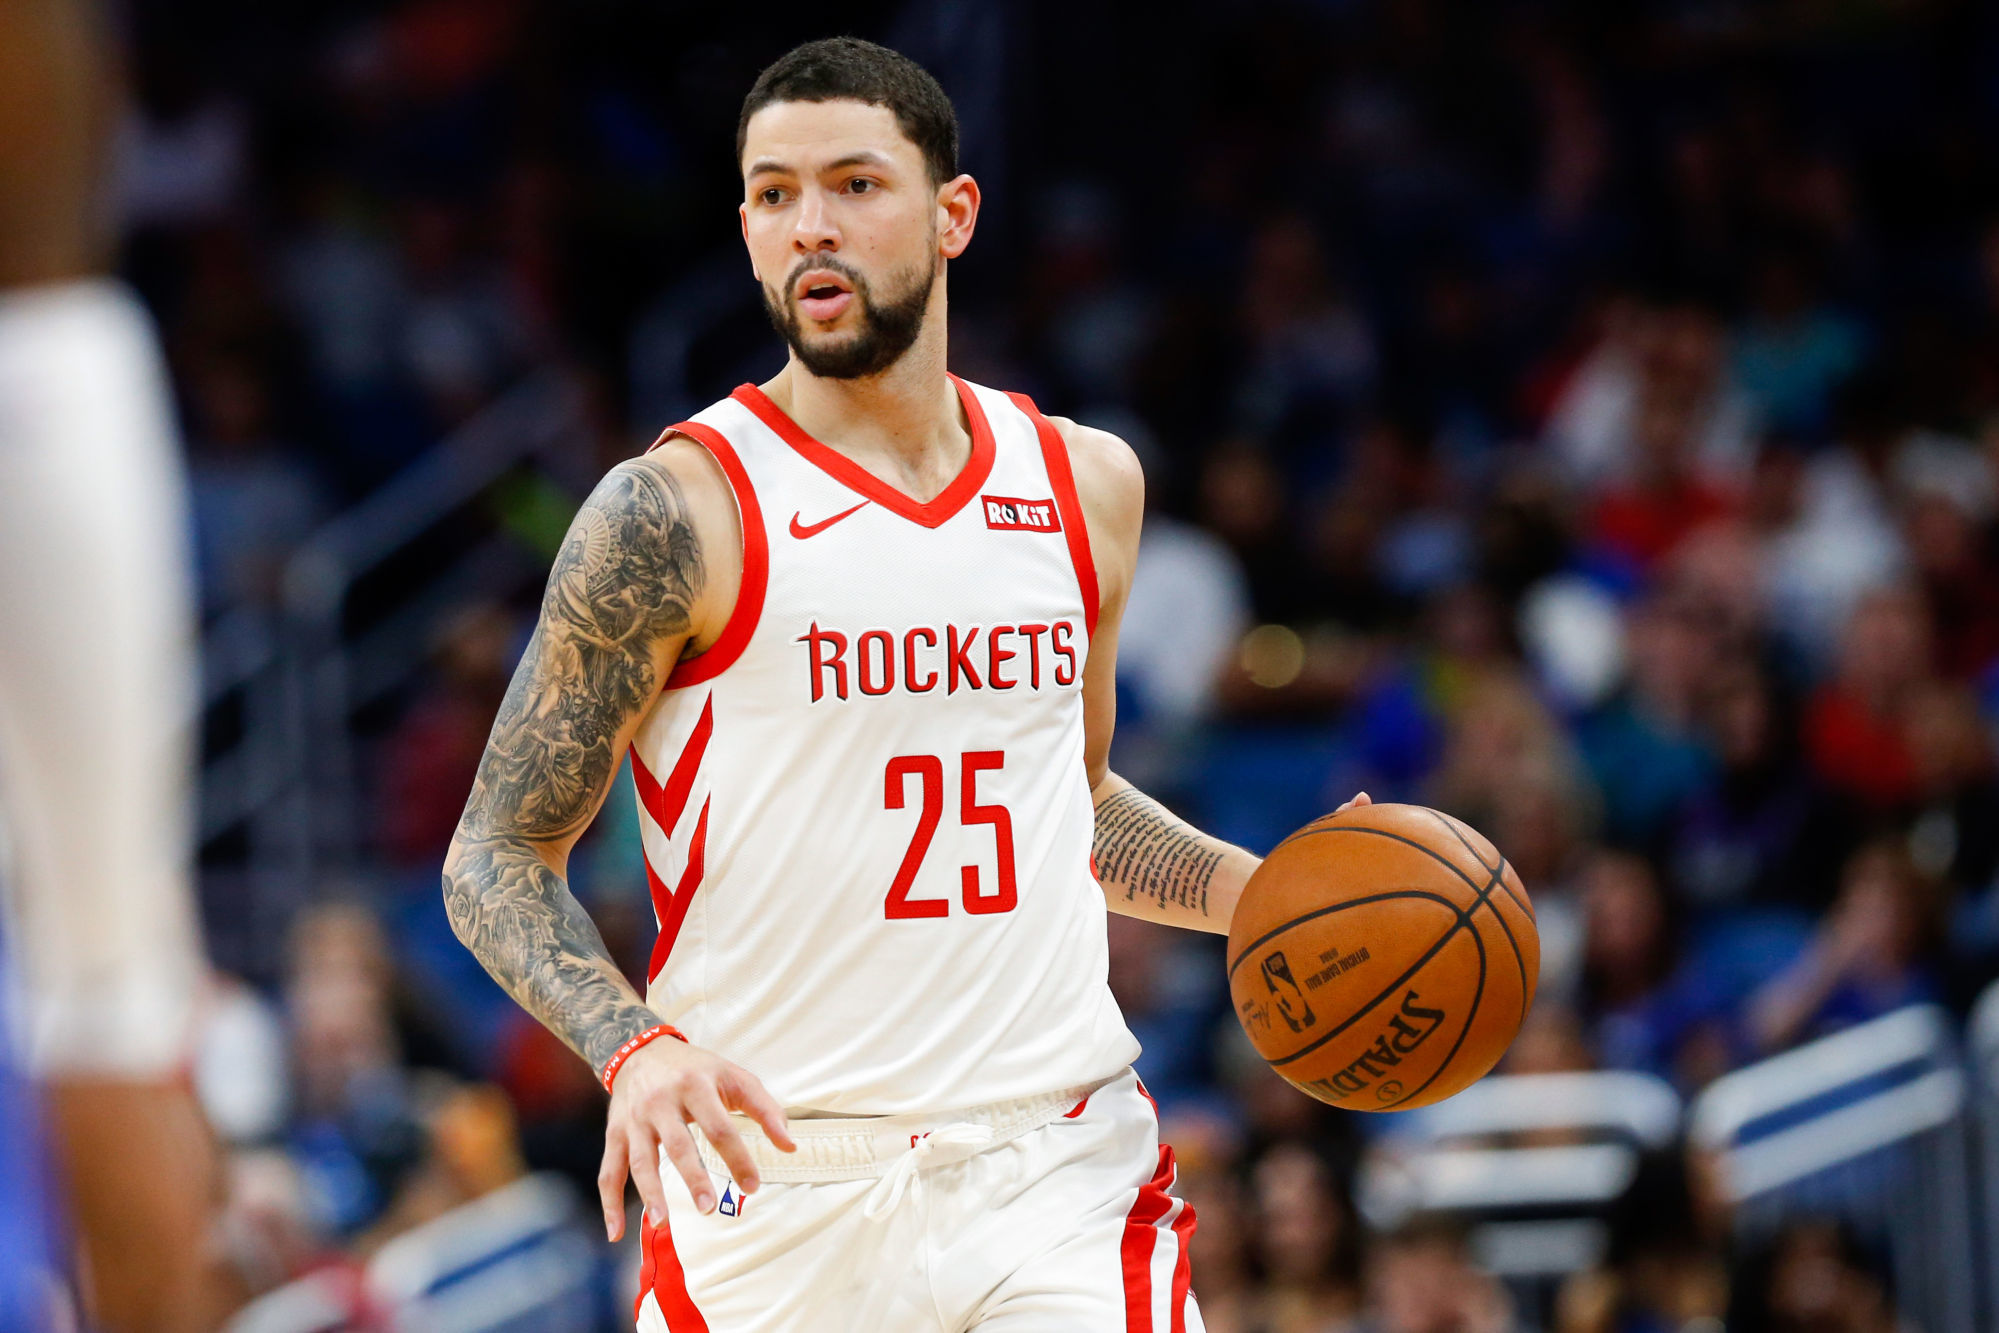 Houston Rockets guard Austin Rivers (25) drives to the basket against the Orlando Magic during the first quarter at Amway Center, in Orlando, FL, USA, on January 13th, 2019. Photo : SUSA / Icon Sport